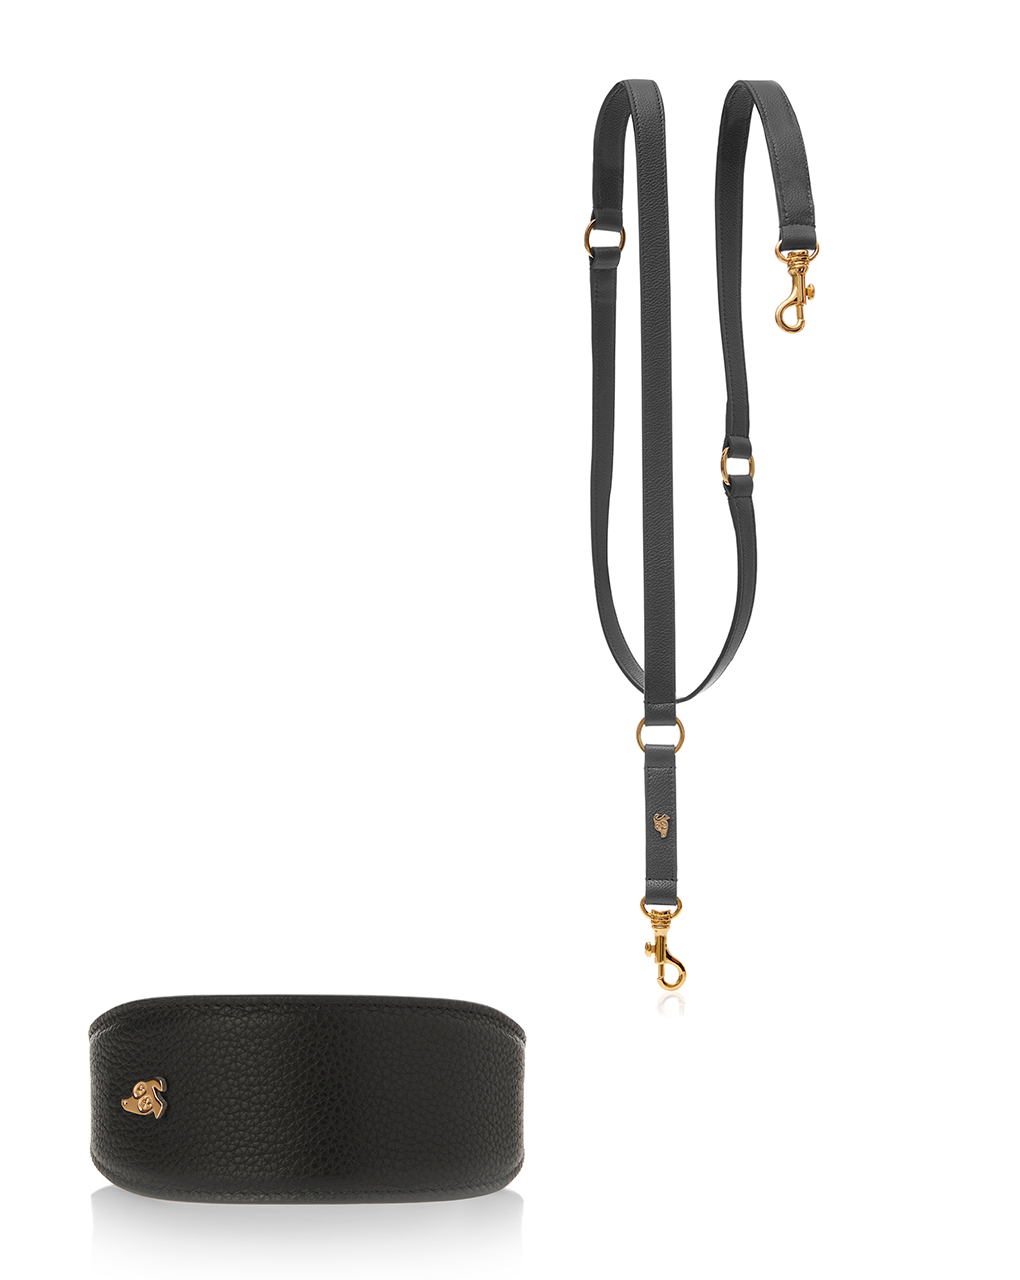 Matching Dog Collar + Leash in Small Grained Leather - Black